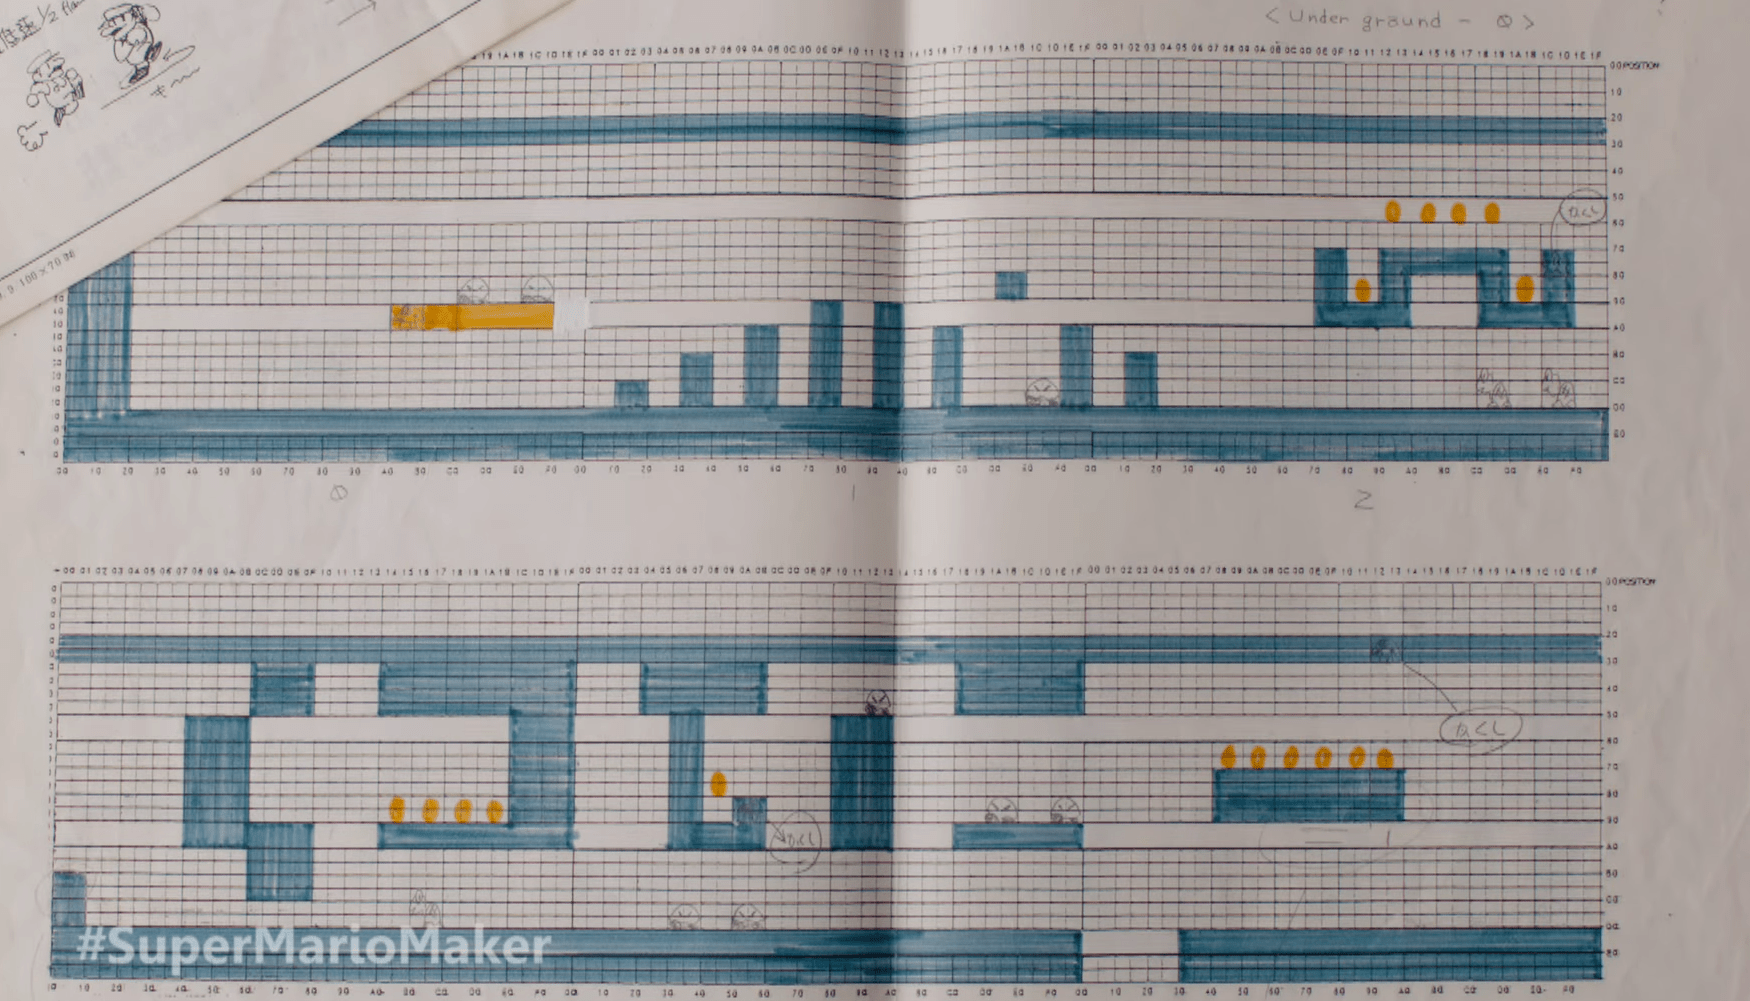 Early Mario levels were designed by hand using graph paper (Nintendo)